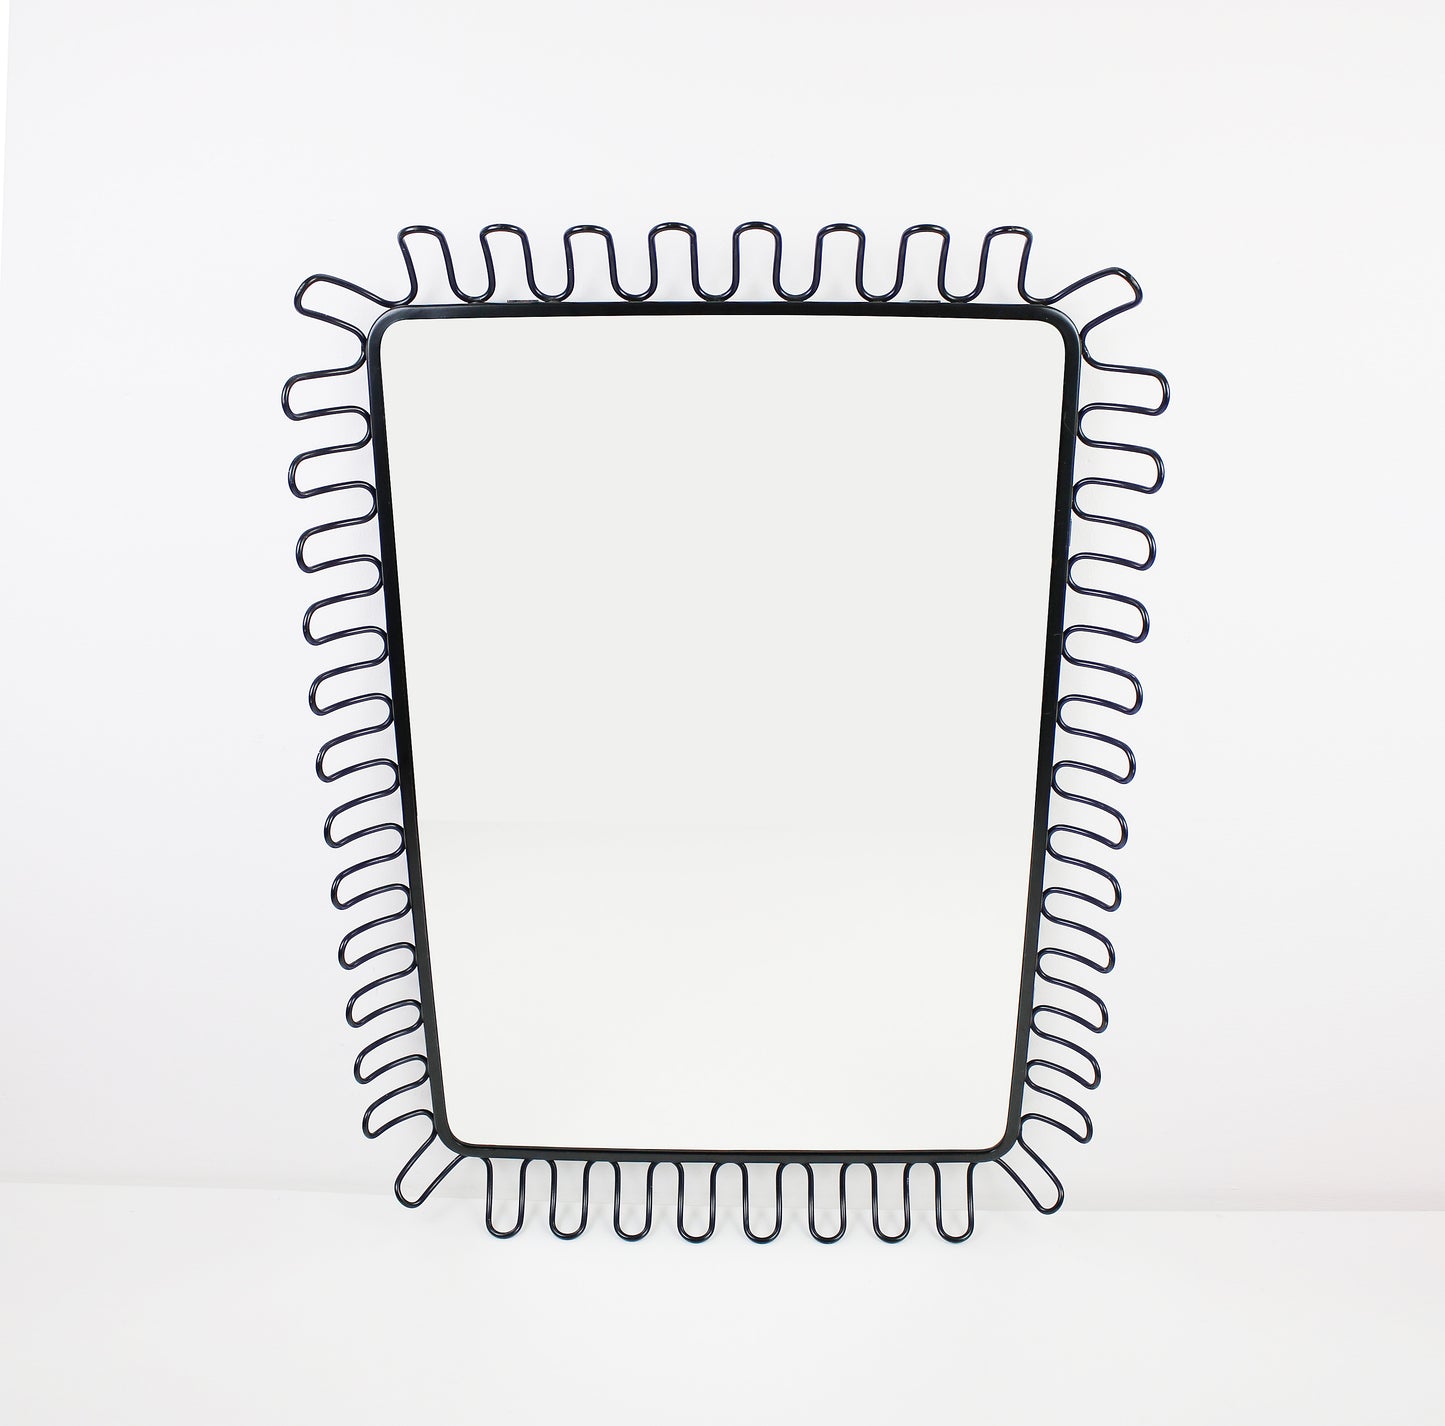 Preloved and retired Mandal mirror designed by Francis Cayouette for IKEA 2008